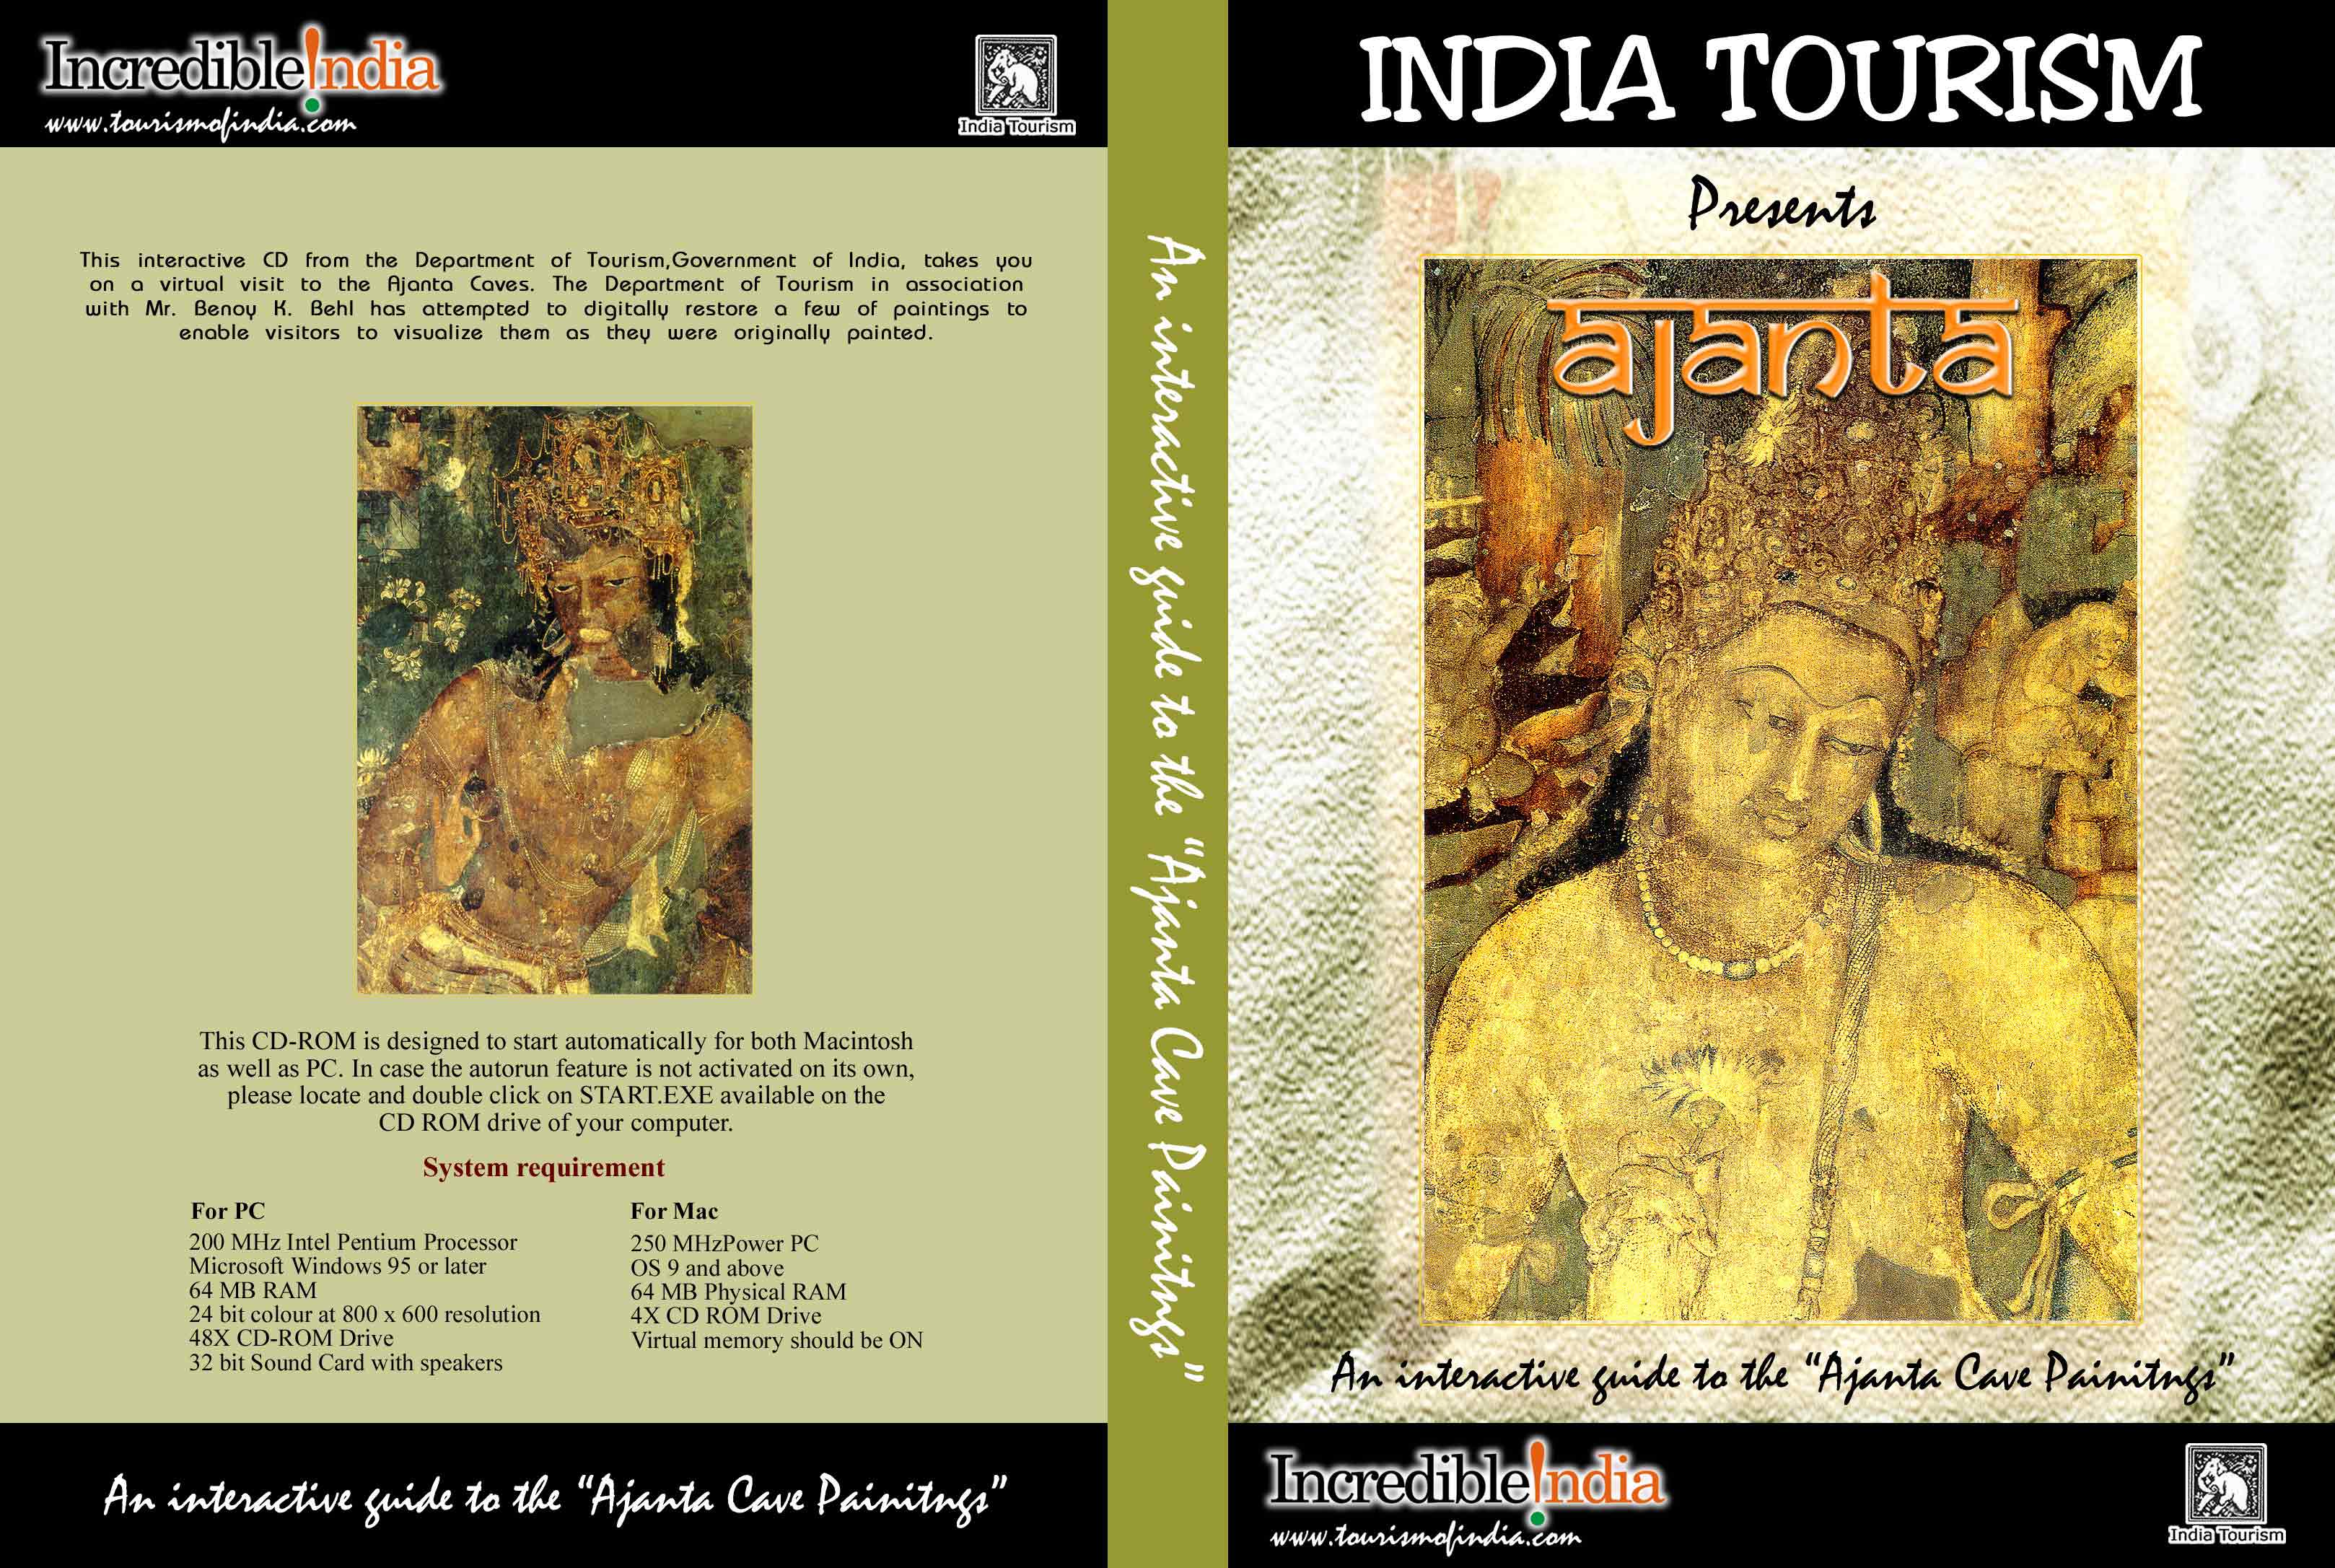 the Department of Tourism Govt of India for the virtual restoration